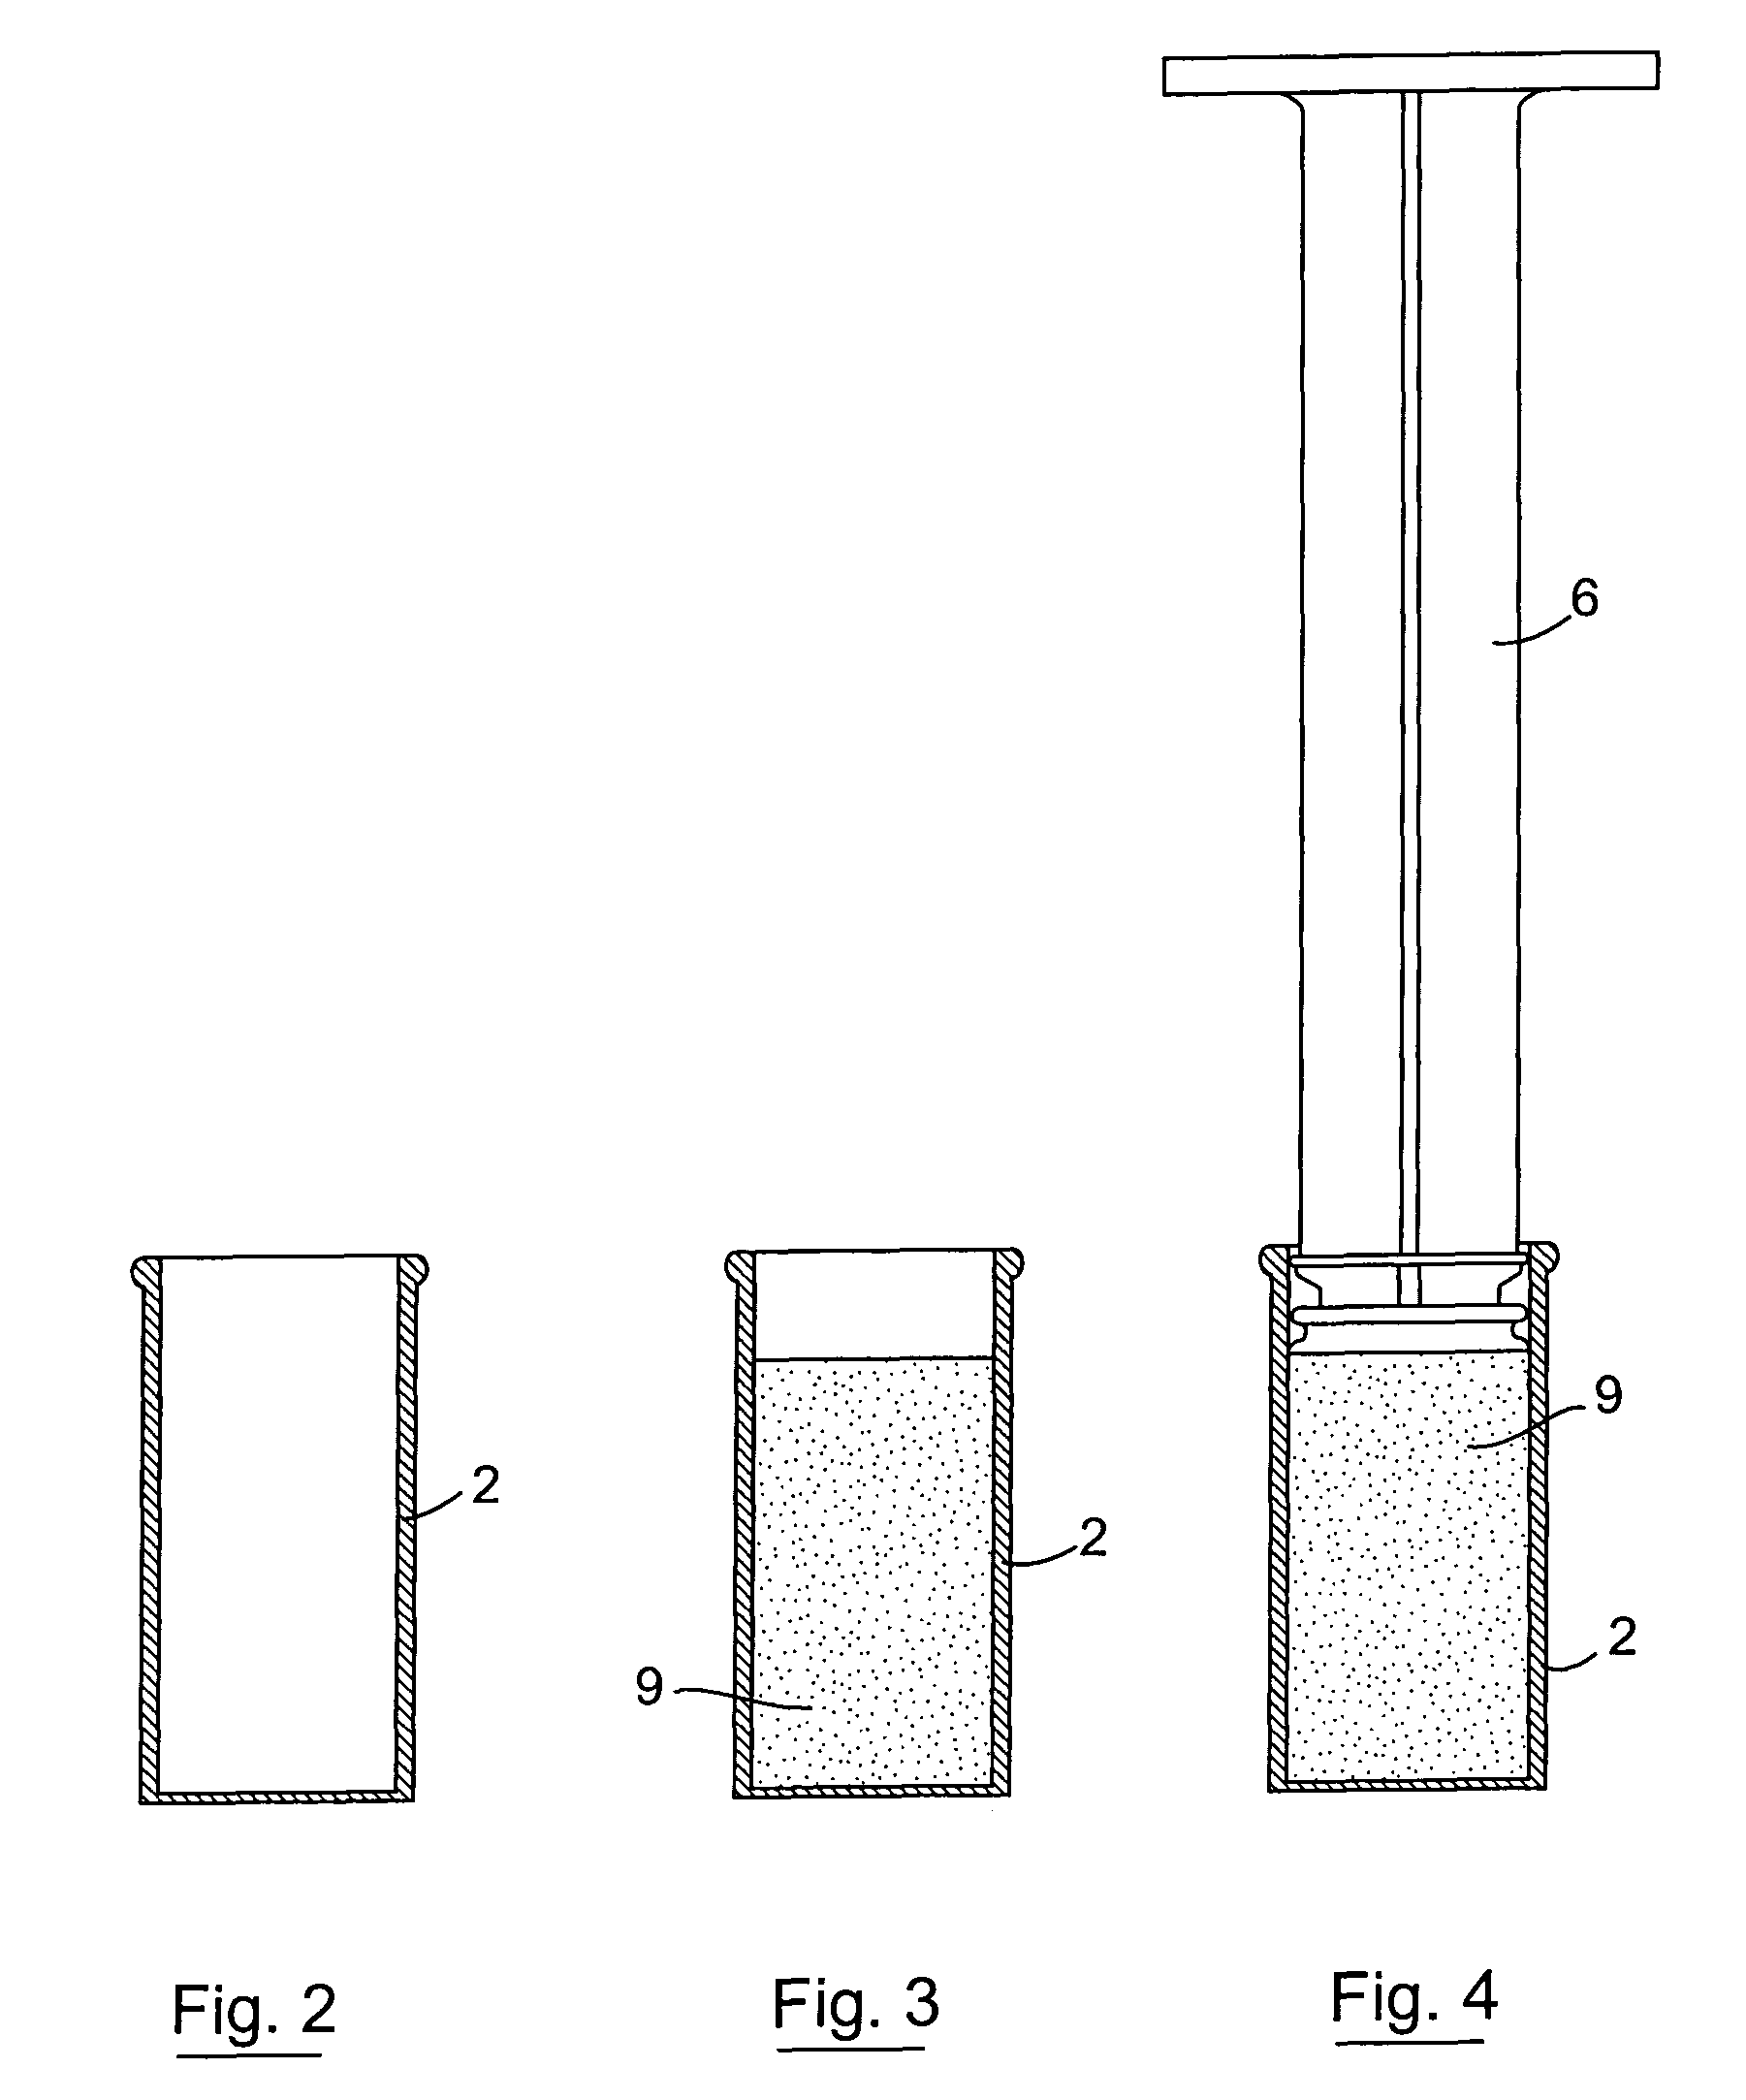 Method and device for administering two components into the teat canal of a non-human animal